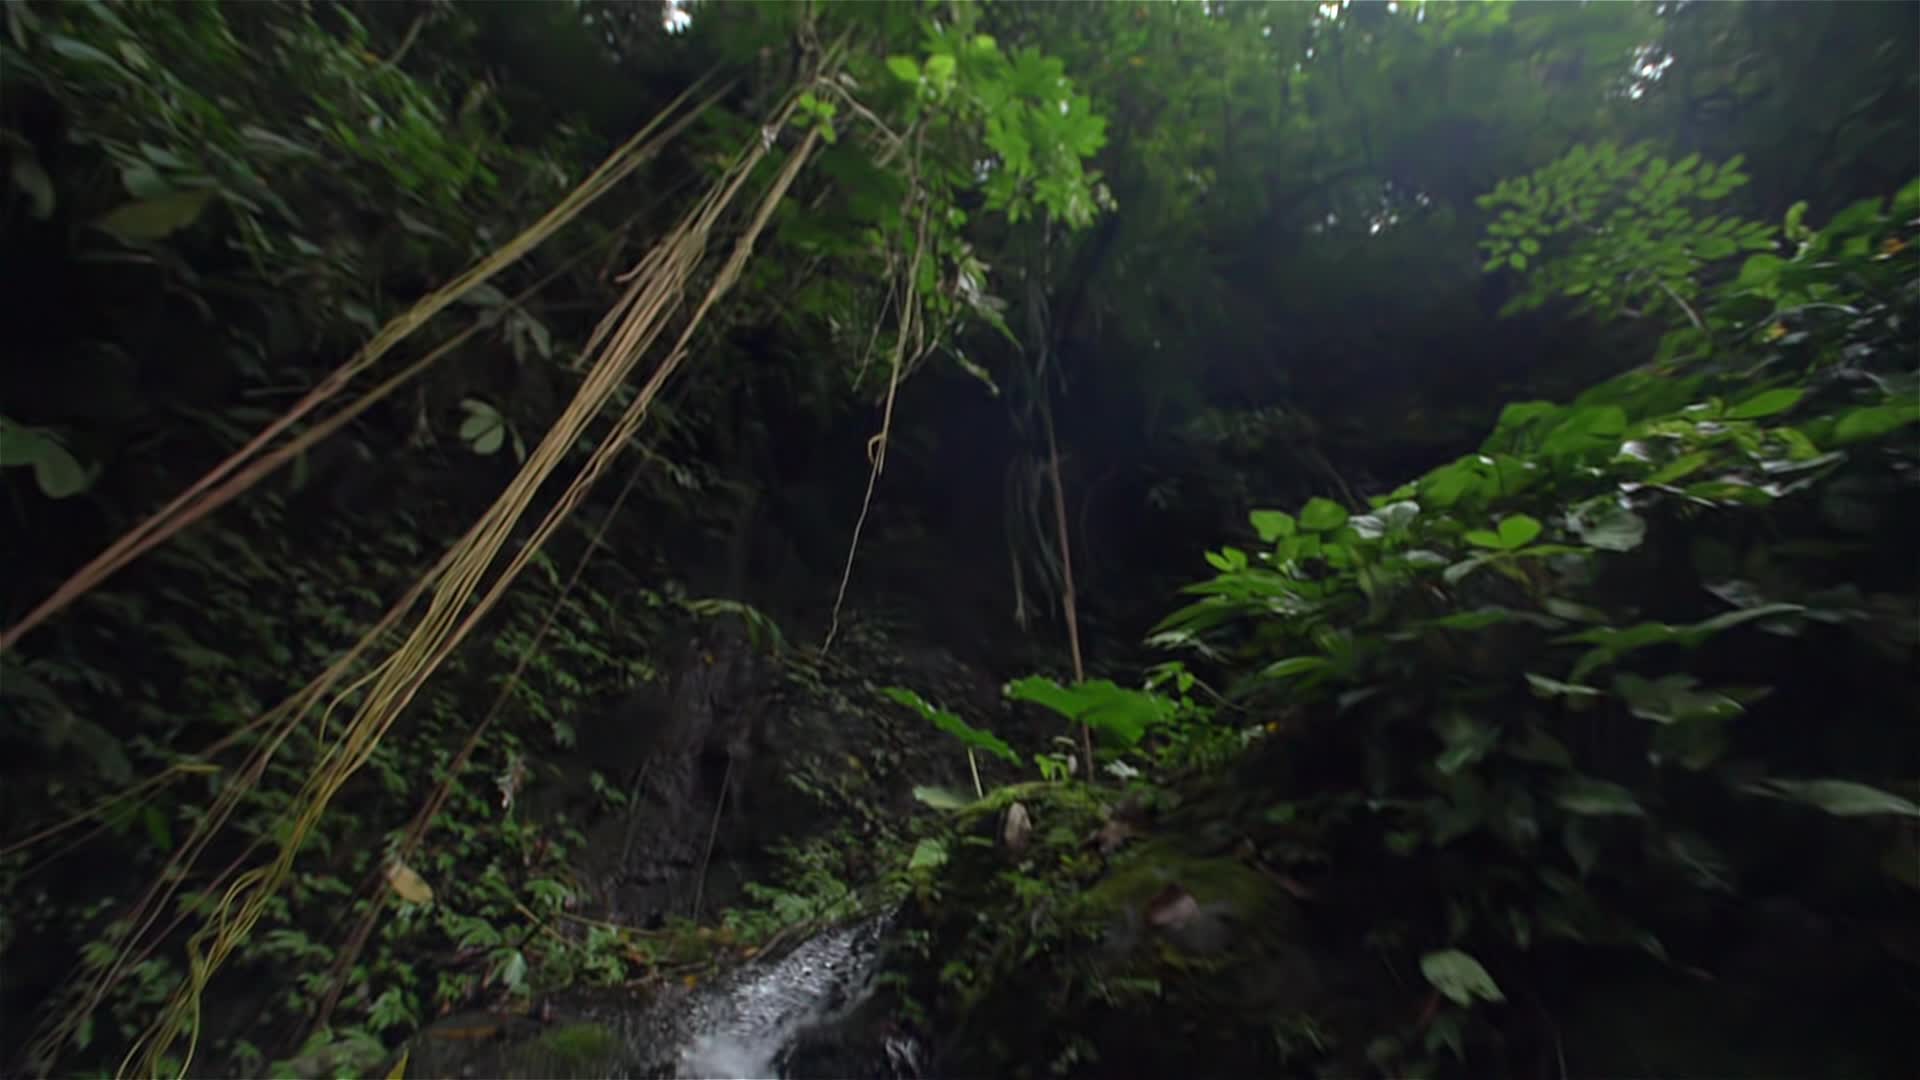 Tracking Shot of a Small Waterfall - Fun - Videotime.com